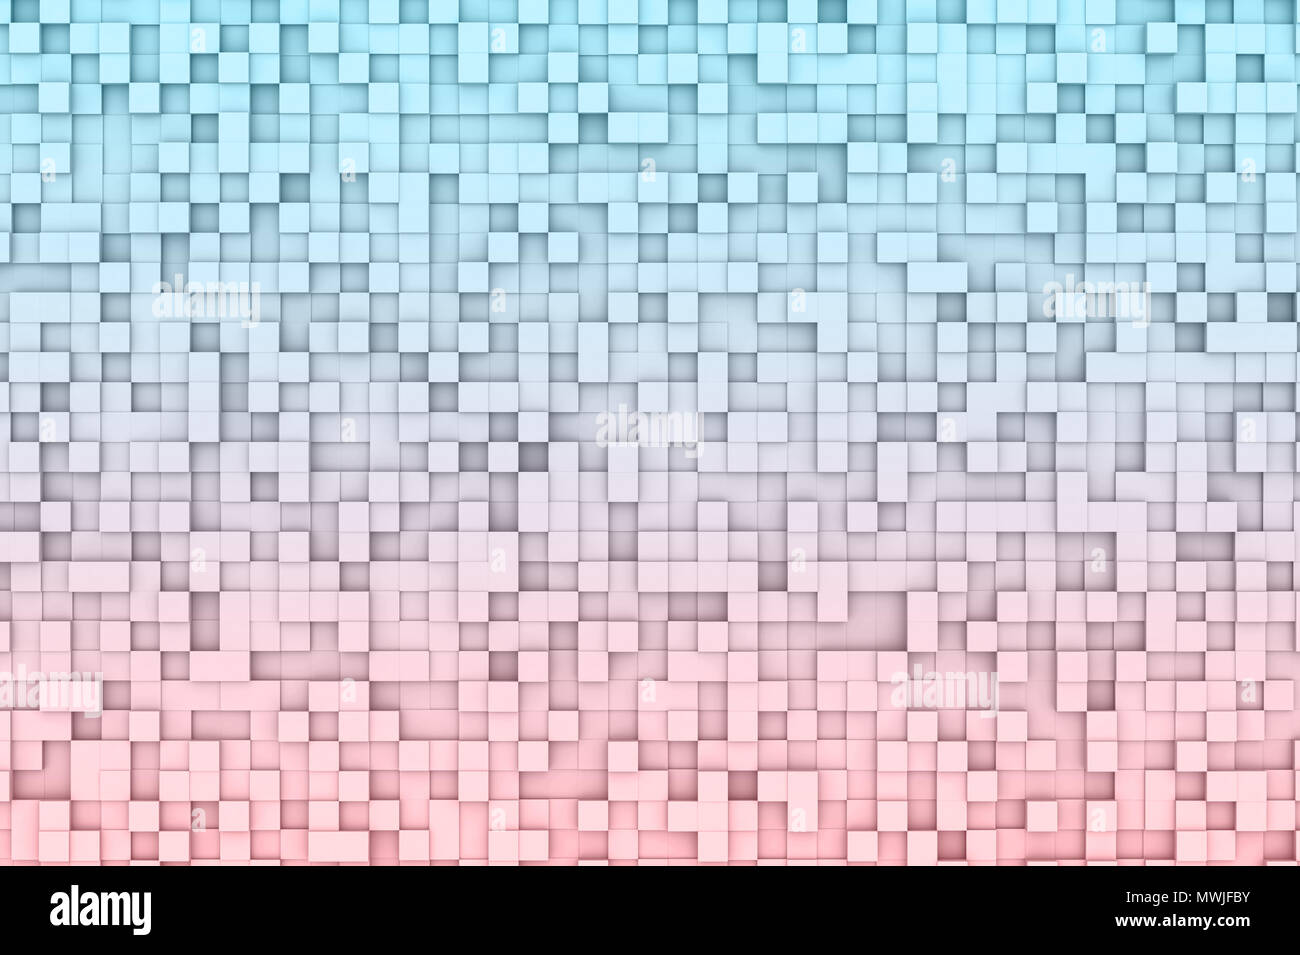 Abstract 3d Geometric Cube Background Design Pattern in Red and Blue Color Gradient Stock Photo